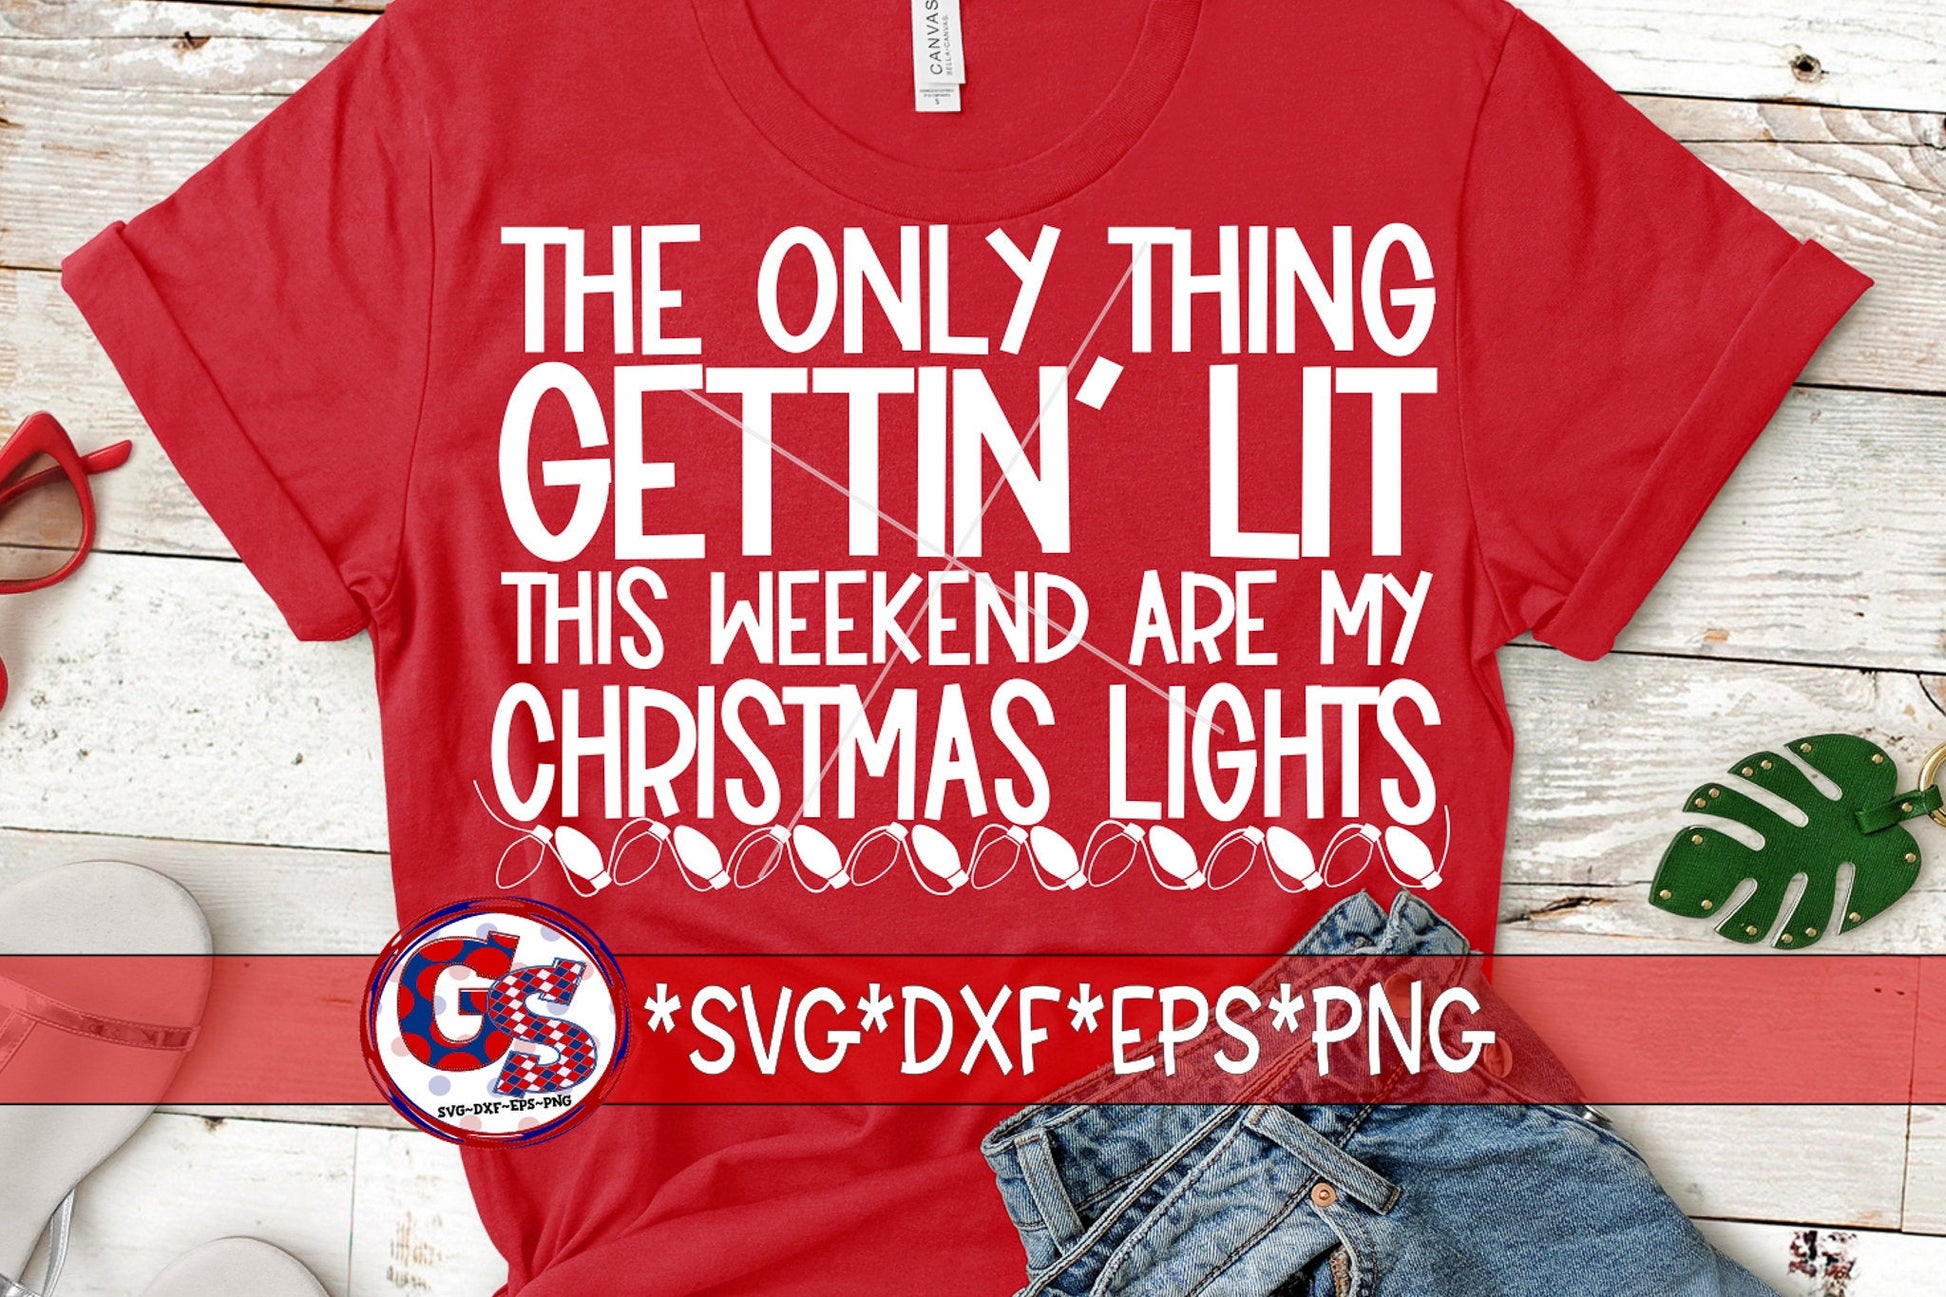 The Only Thing Gettin Lit This Weekend Are My Christmas Lights svg dxf eps png. Christmas SvG | Christmas DxF | Instant Download Cut File